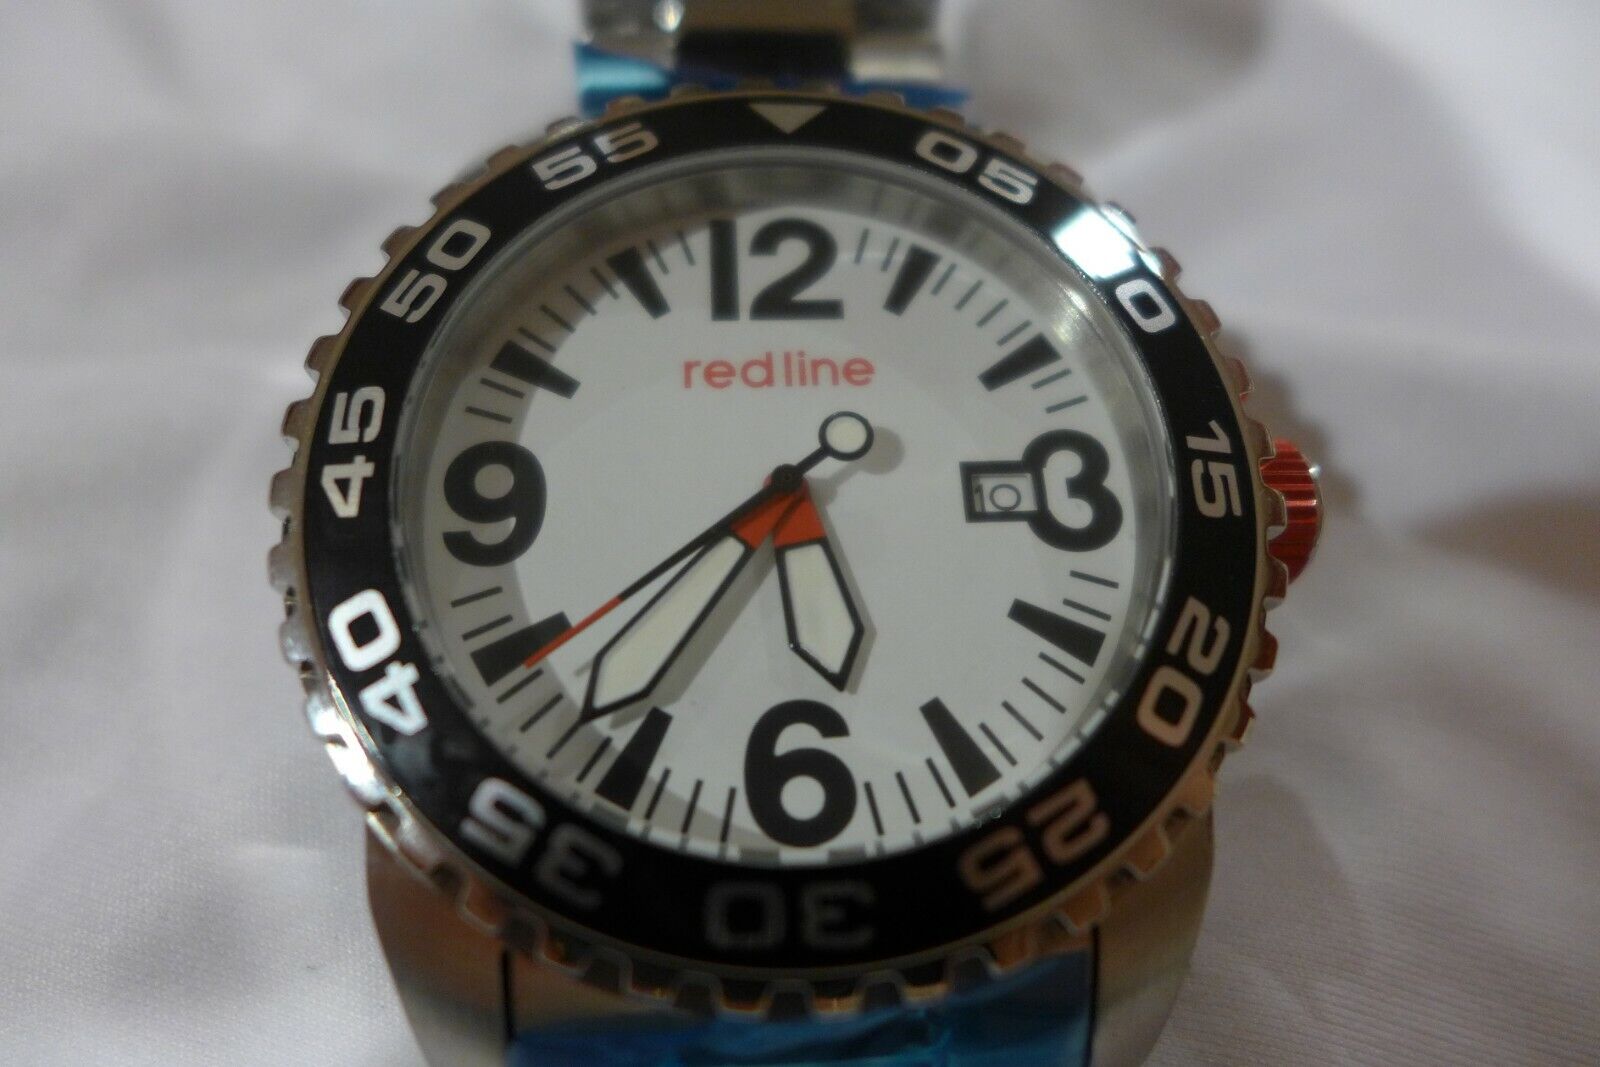 NIB Red Line Japanese Automatic Diving Watch on Bracelet, RL-60013, 46mm